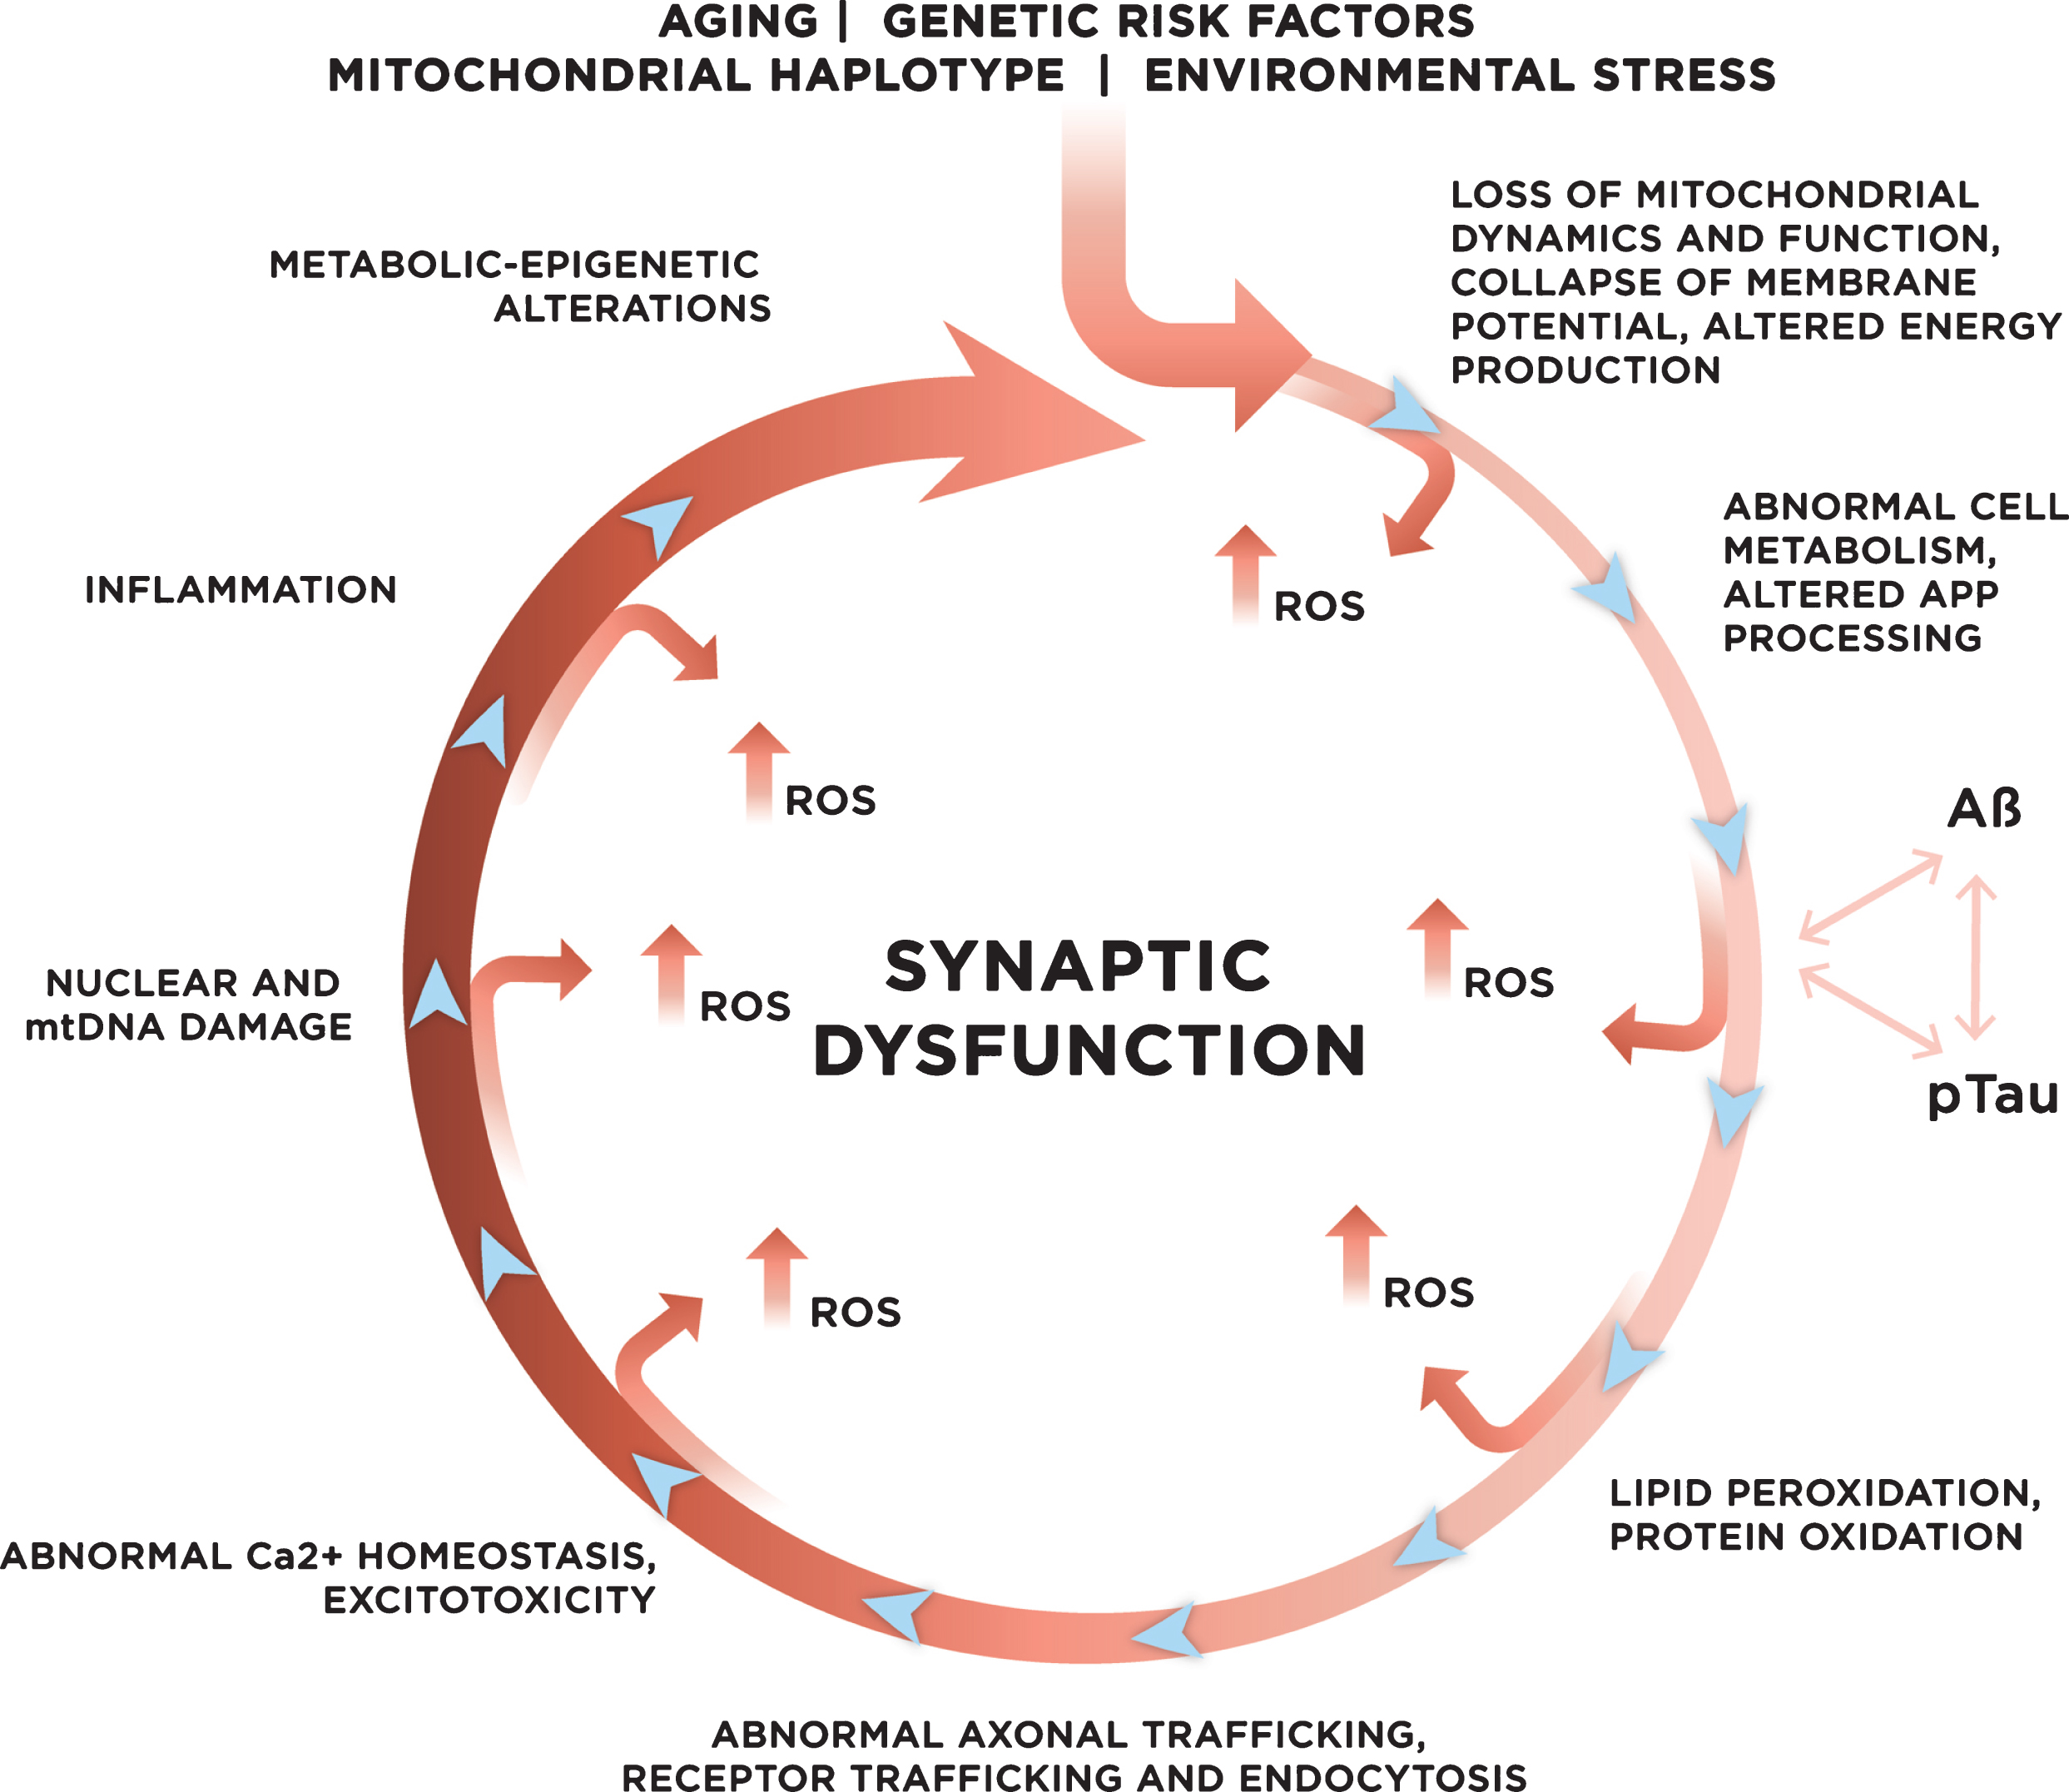 Genetic and environmental risk factors contribute to the development of late onset sporadic AD. With age, increased mitochondrial dysfunction and ROS production could initiate a vicious cycle where multiple systems and mechanisms affected by ROS exacerbate ROS production, accelerating cellular damage, and leading to synaptic dysfunction.